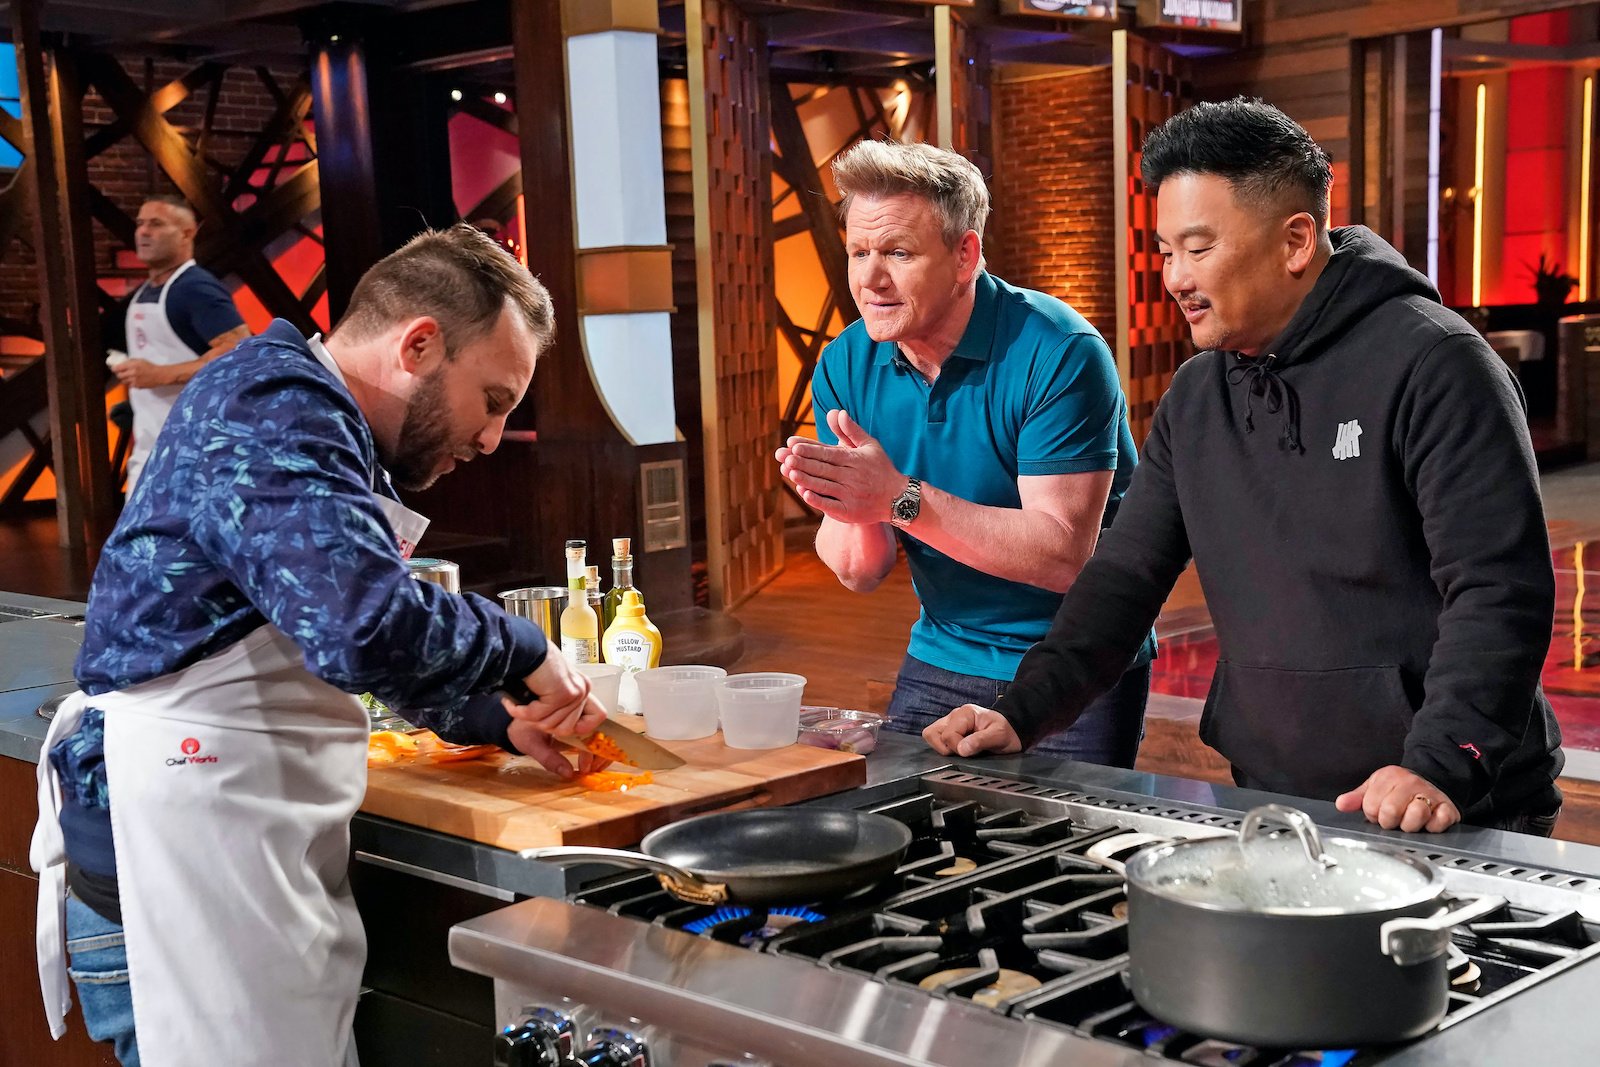 MasterChef contestant Alejandro cuts up a red pepper in front of chef Gordon Ramsay and chef Roy Choi